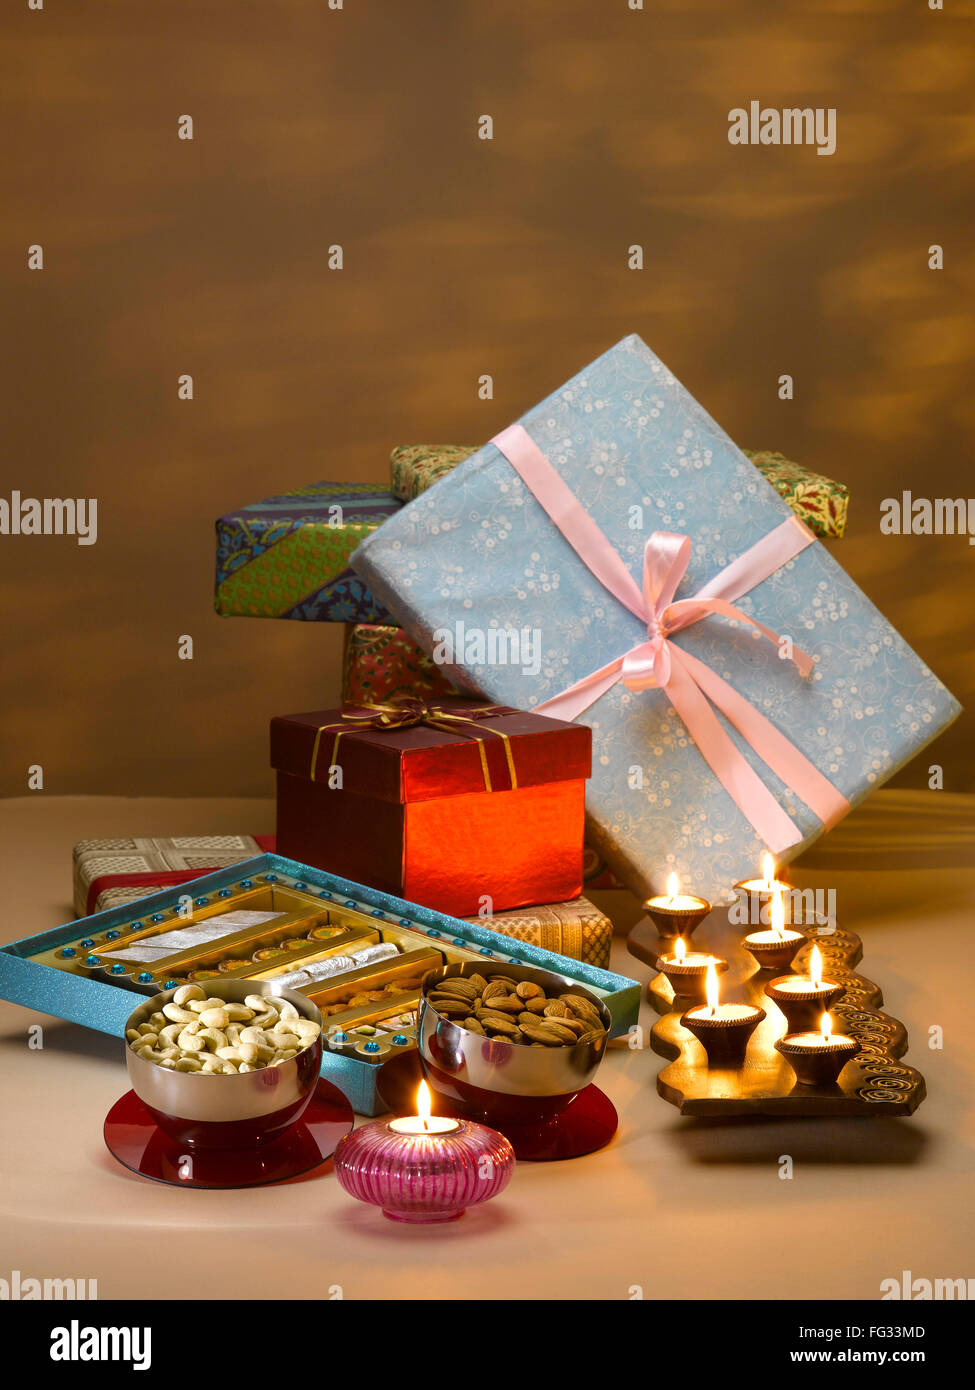 Gifts box ; sweets ; dry fruits and oil lamps for diwali festival ; India Stock Photo